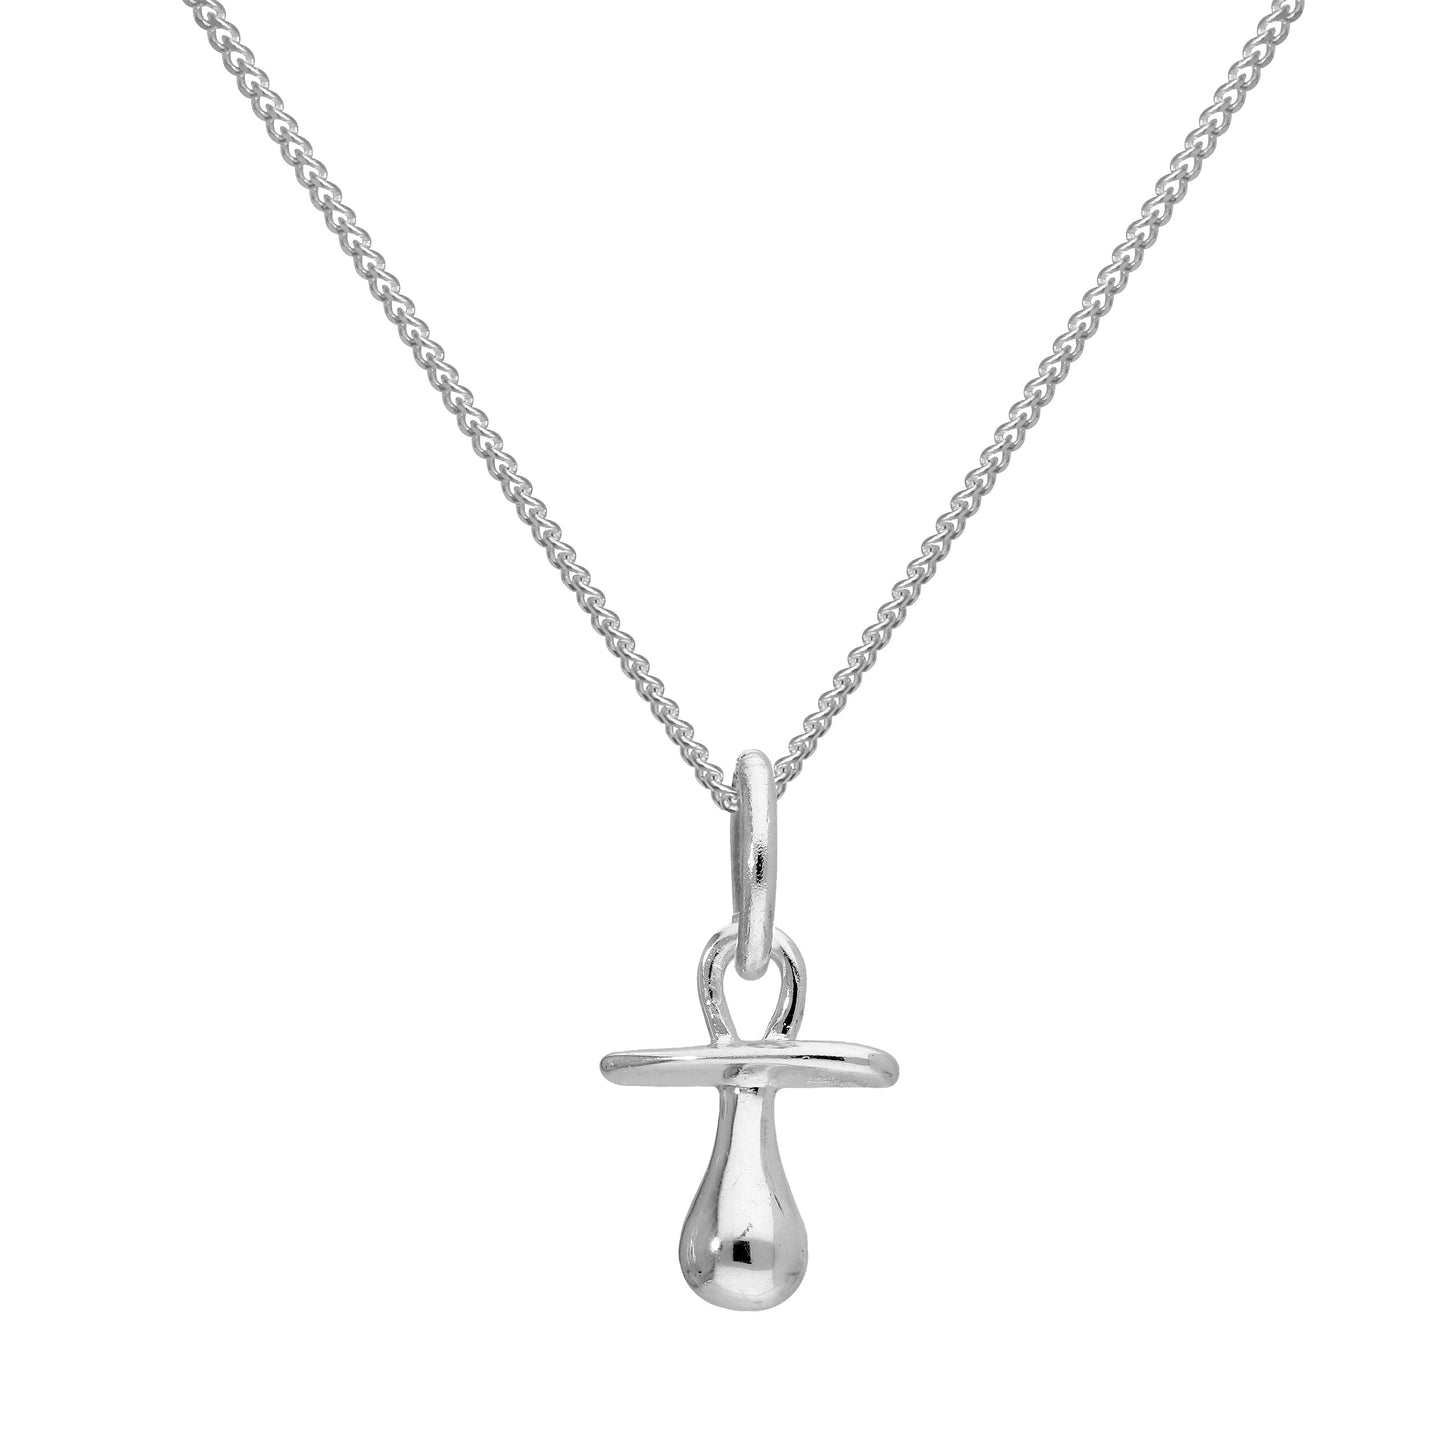 Sterling Silver Baby's Dummy Pendant Necklace 16 - 22 Inches